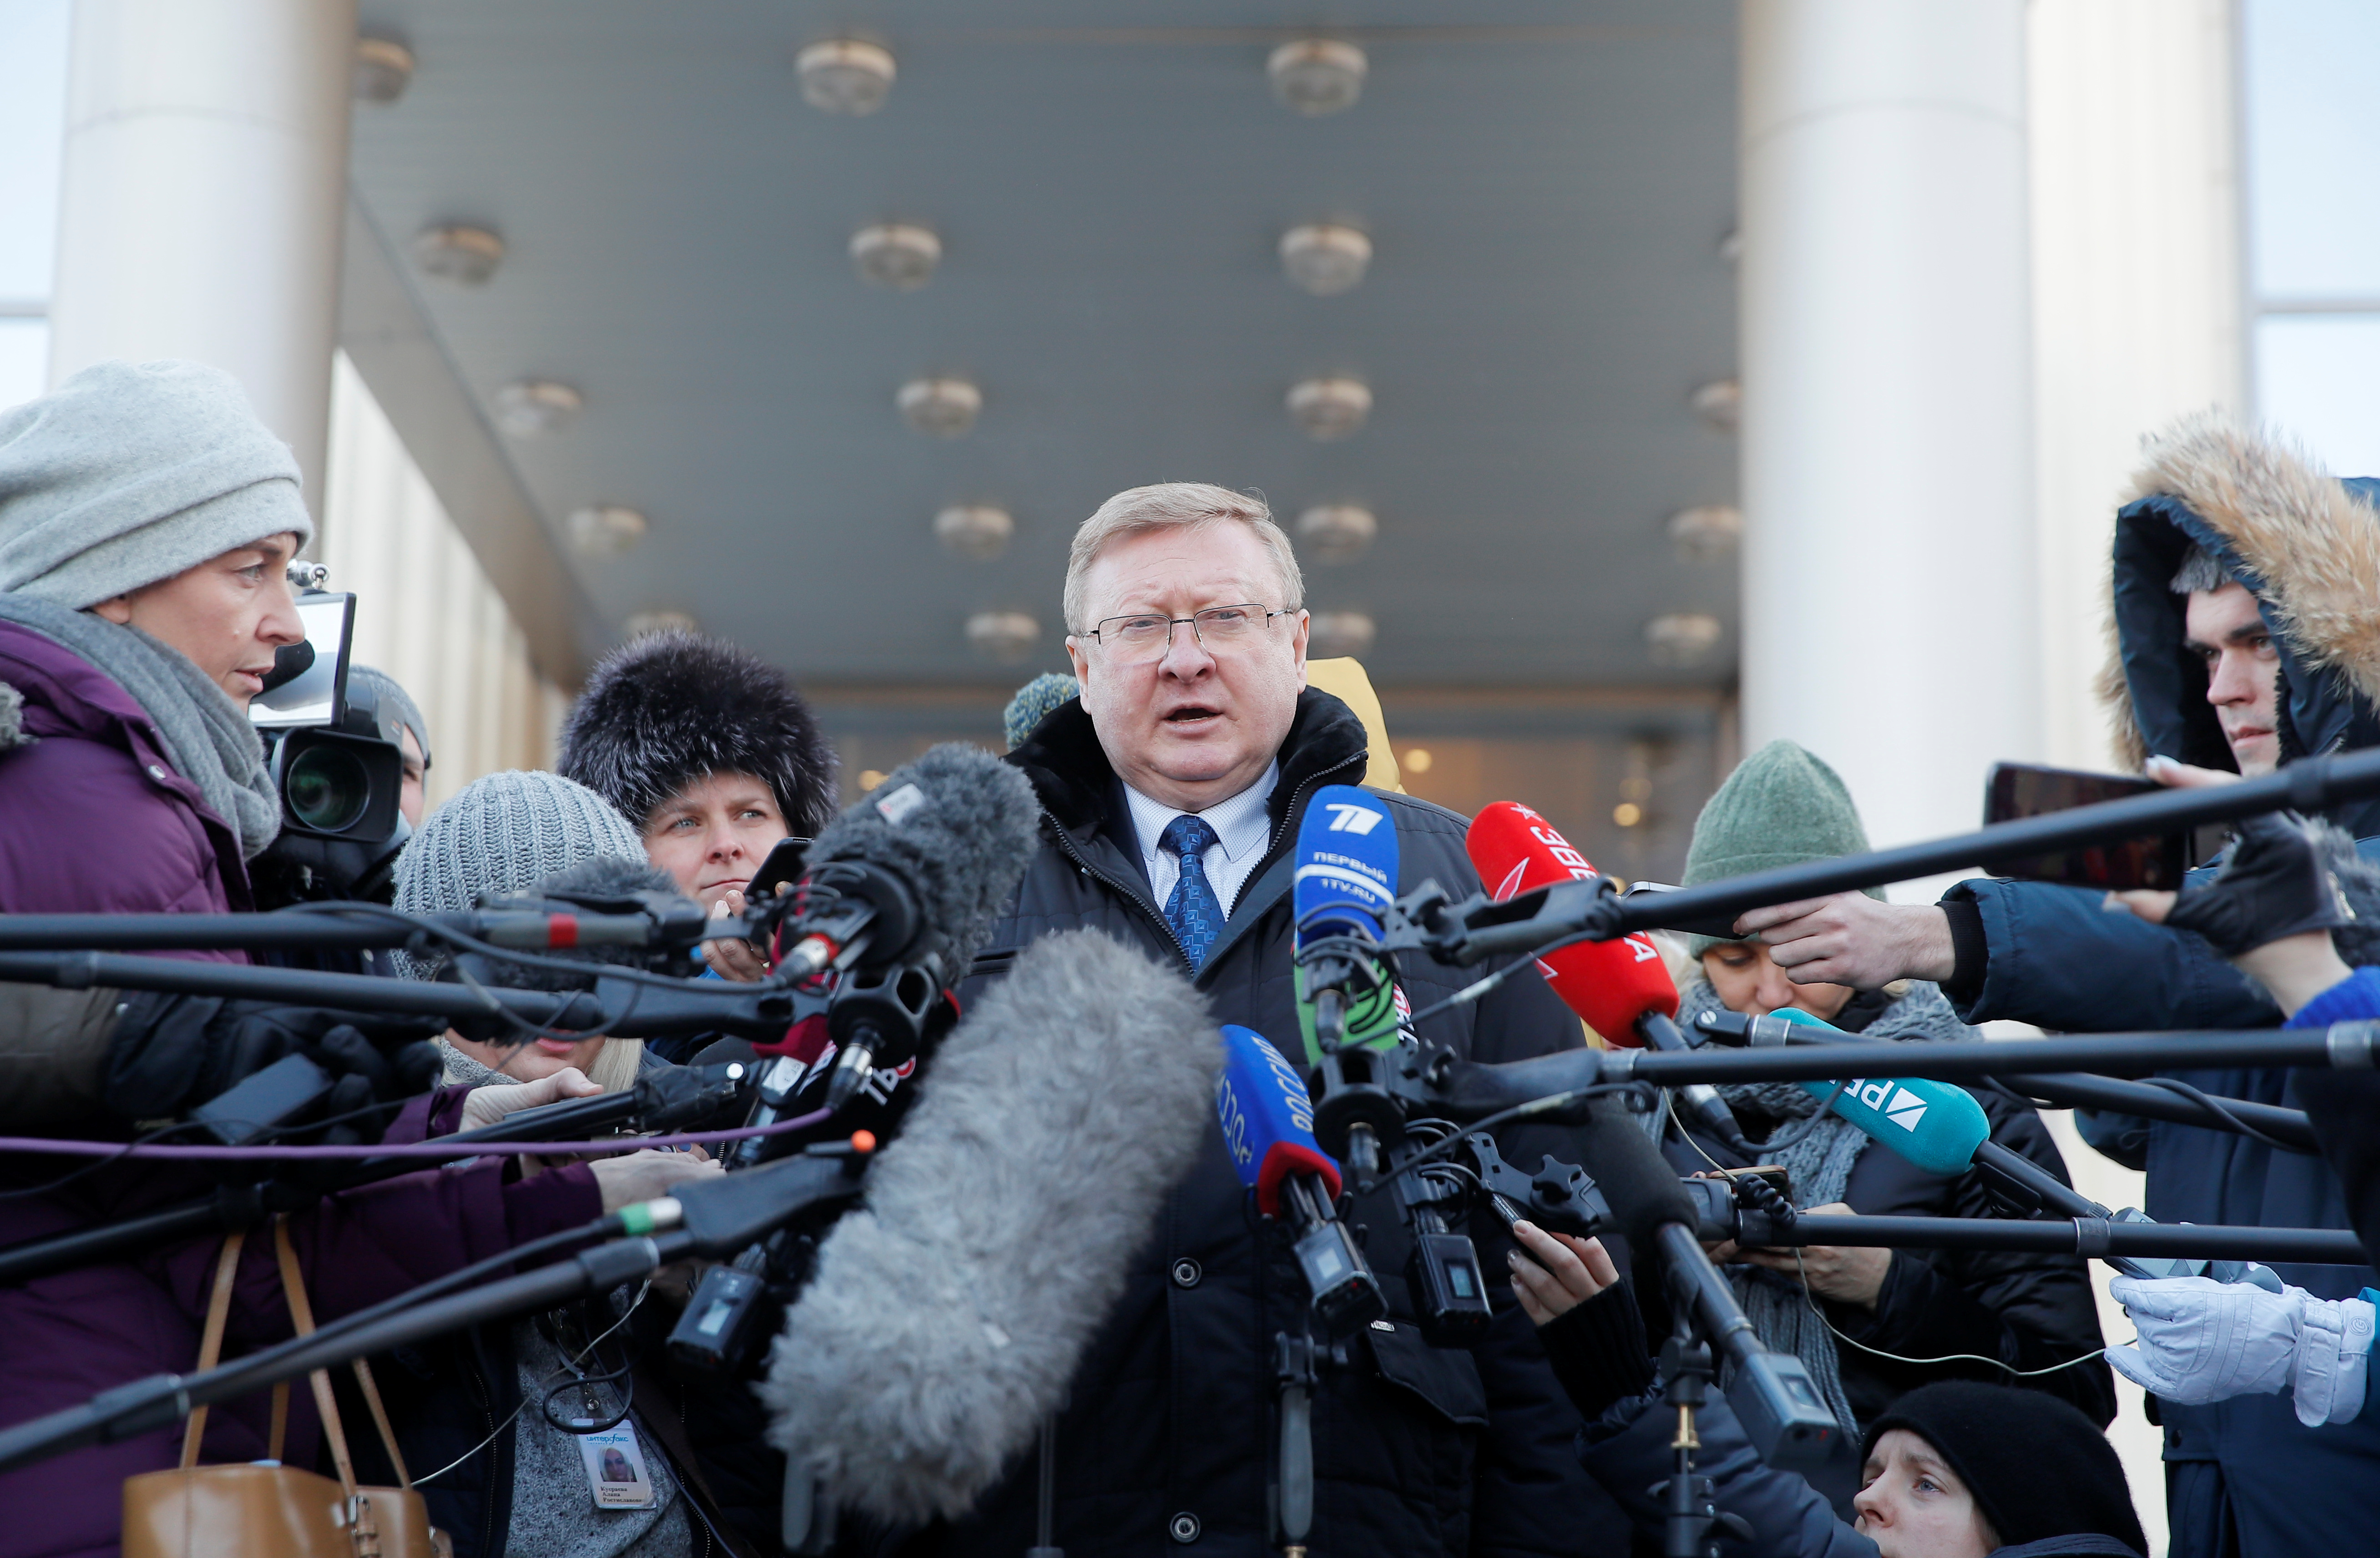 Vladimir Zherebenkov, lawyer of former U.S. marine Paul Whelan, who was detained by Russia's FSB security service on suspicion of spying, addresses the media outside a court building in Moscow, Russia January 22, 2019. REUTERS/Maxim Shemetov